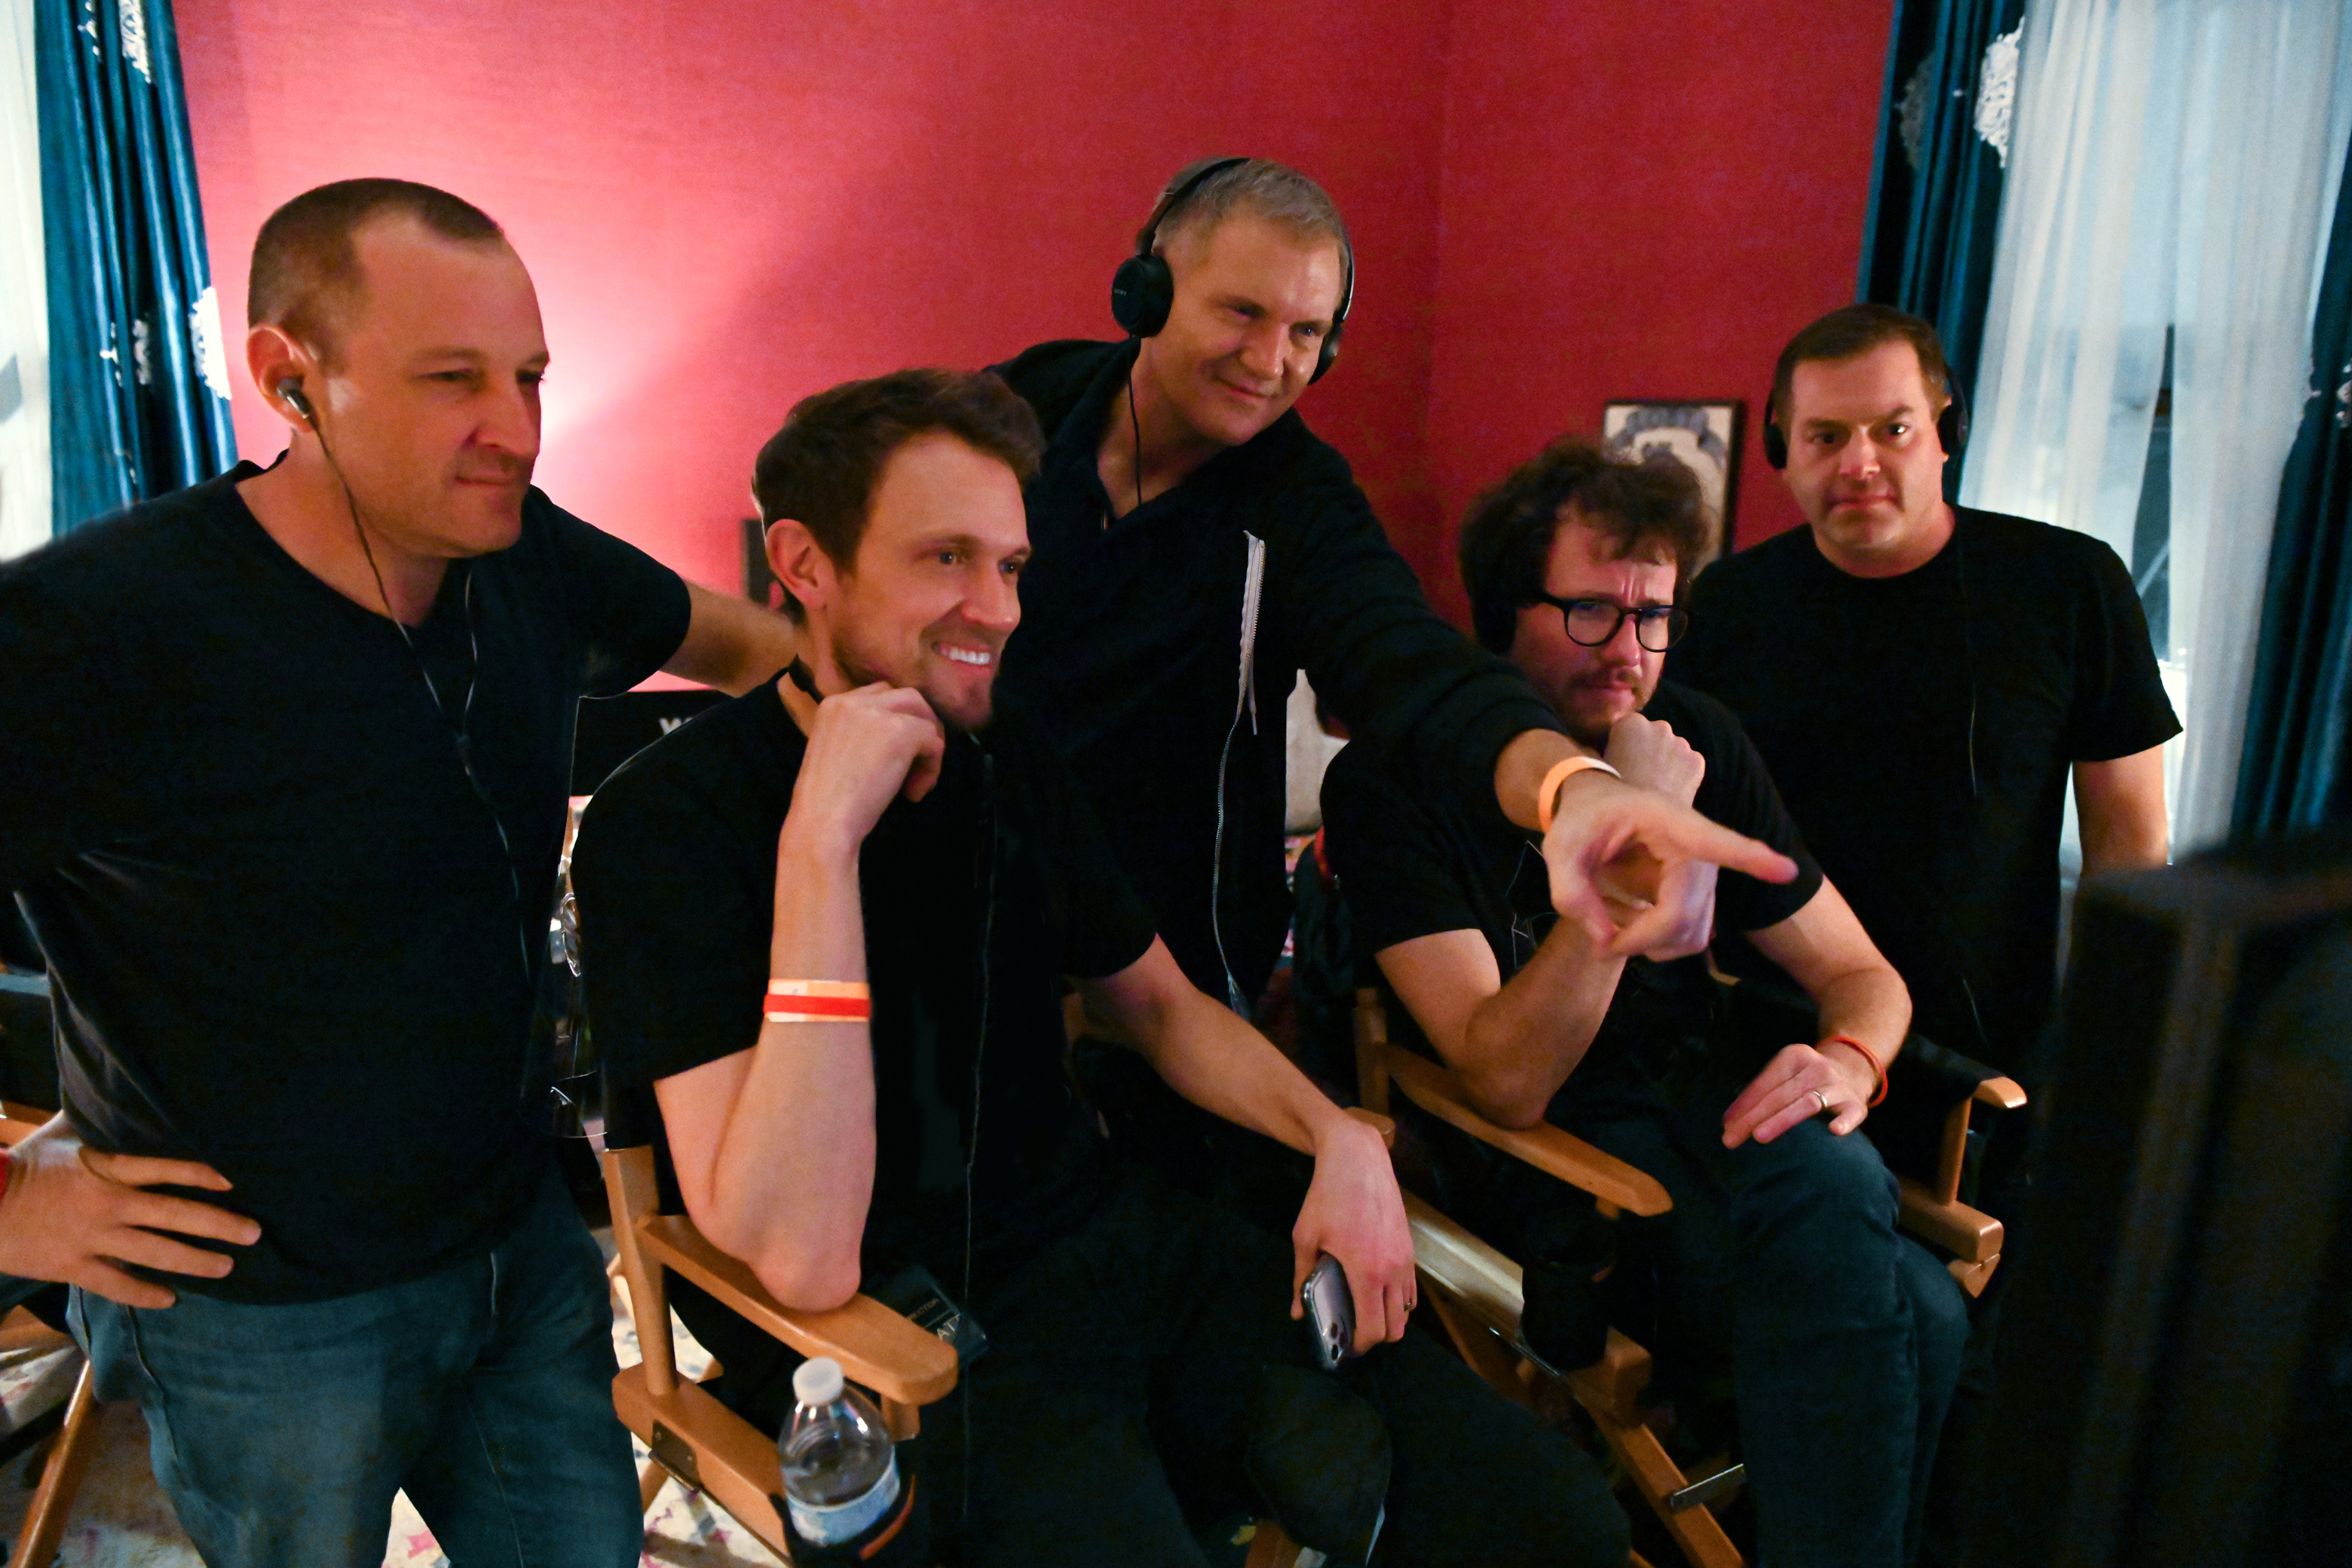 L-r, Producer William Sherak, Director Matt Bettinelli-Olpin, Executive Producer Kevin Williamson, Director Tyler Gillett and Executive Producer Chad Villella on the set of Paramount Pictures and Spyglass Media Group's "Scream."